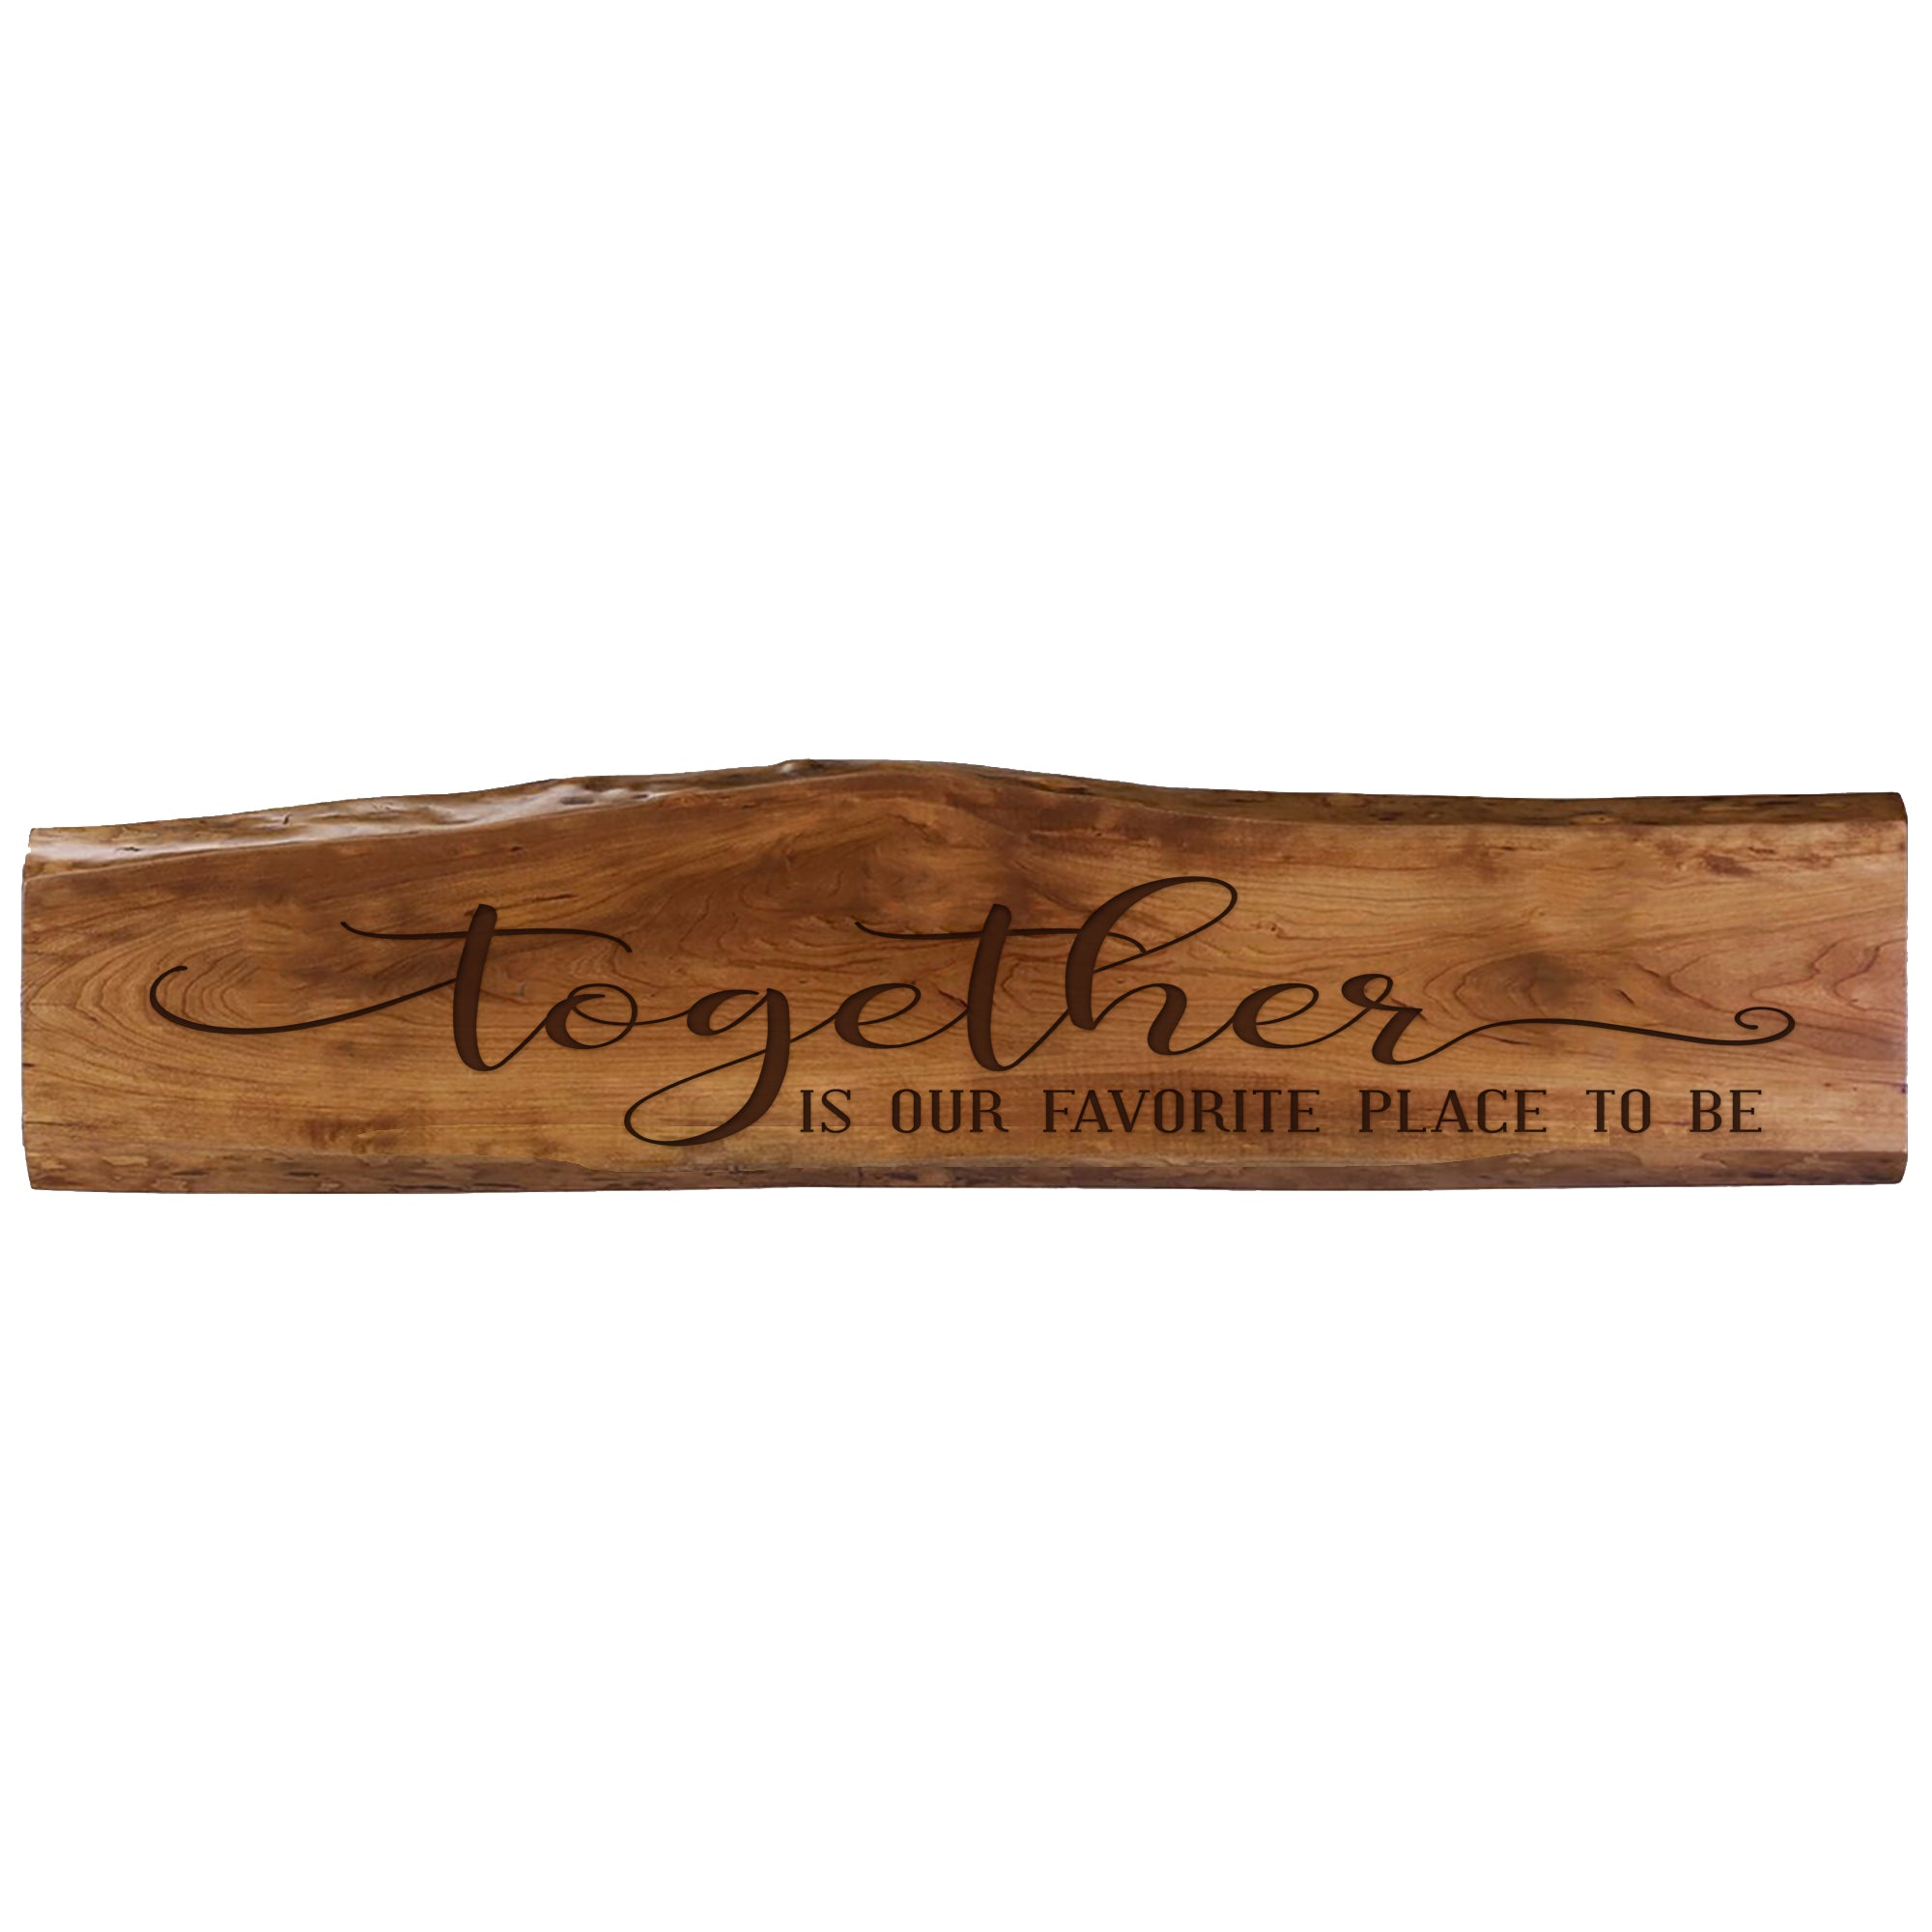 LifeSong Milestones Together Live Edge Solid Cherry Wall Hanging Decor For Living Room Entryway Kitchen Bedroom New Home - Modern Farmhouse Decor Gift 11“ x 47”